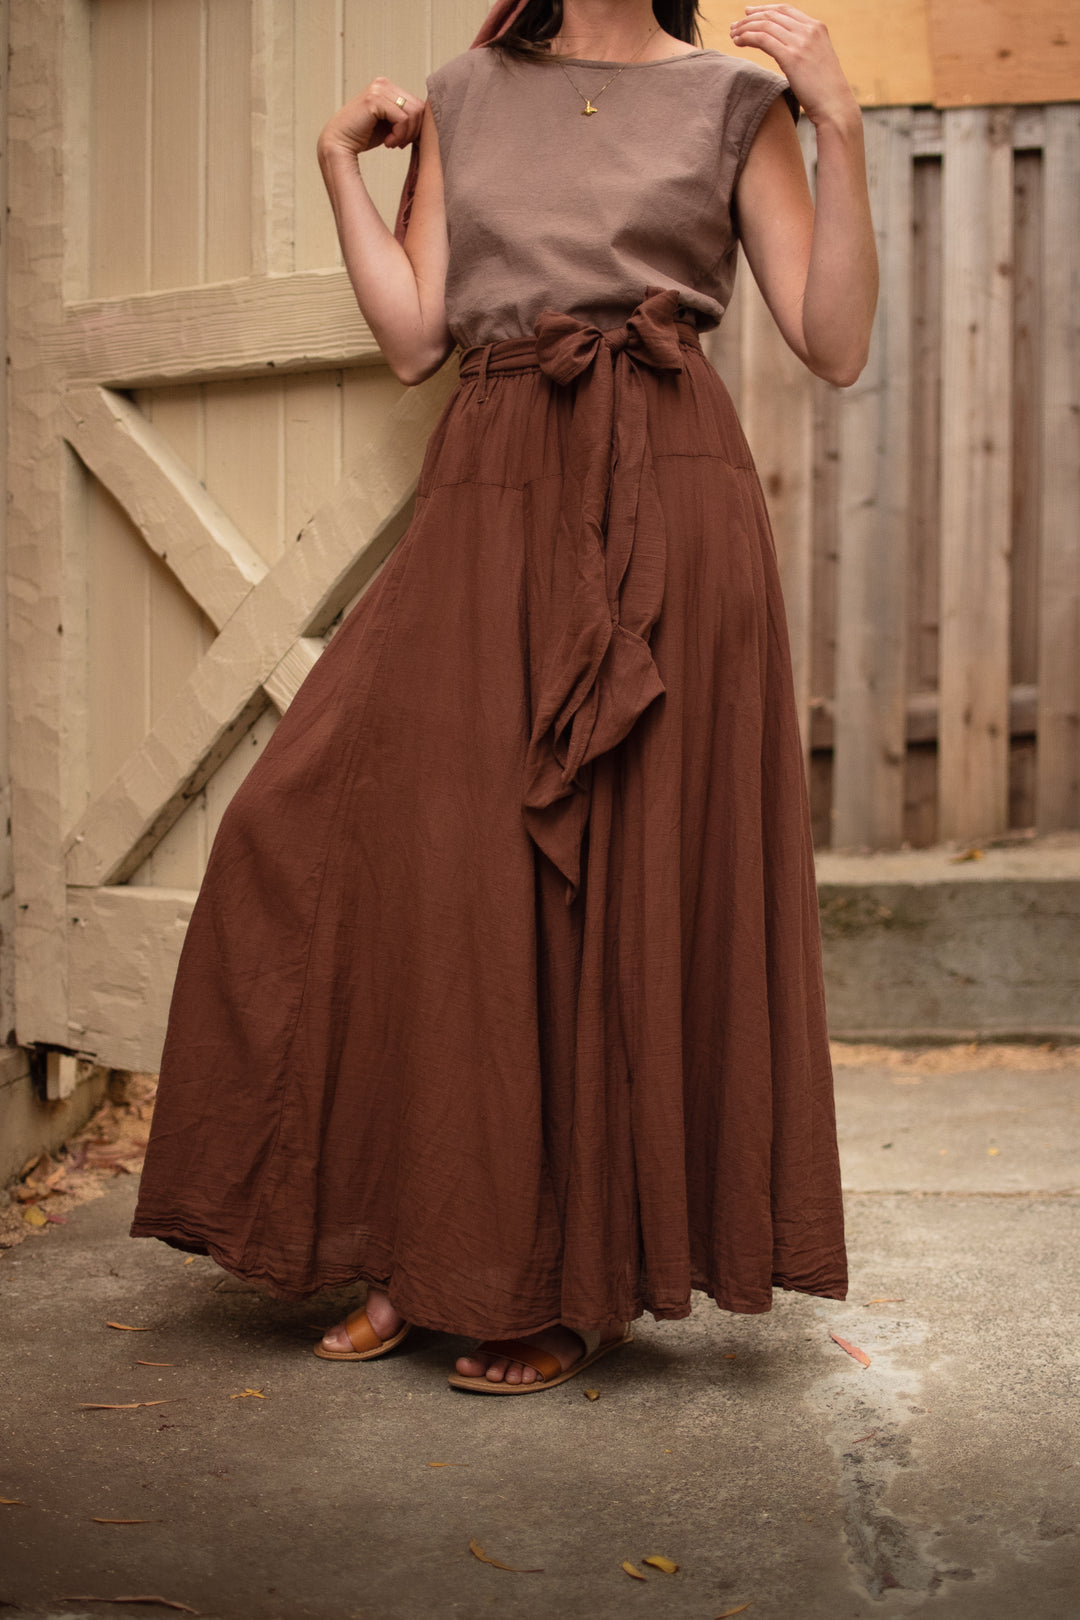 Female model is standing by barn door with light brown tank top and long dark brown skirt with bow. She has sandals on.